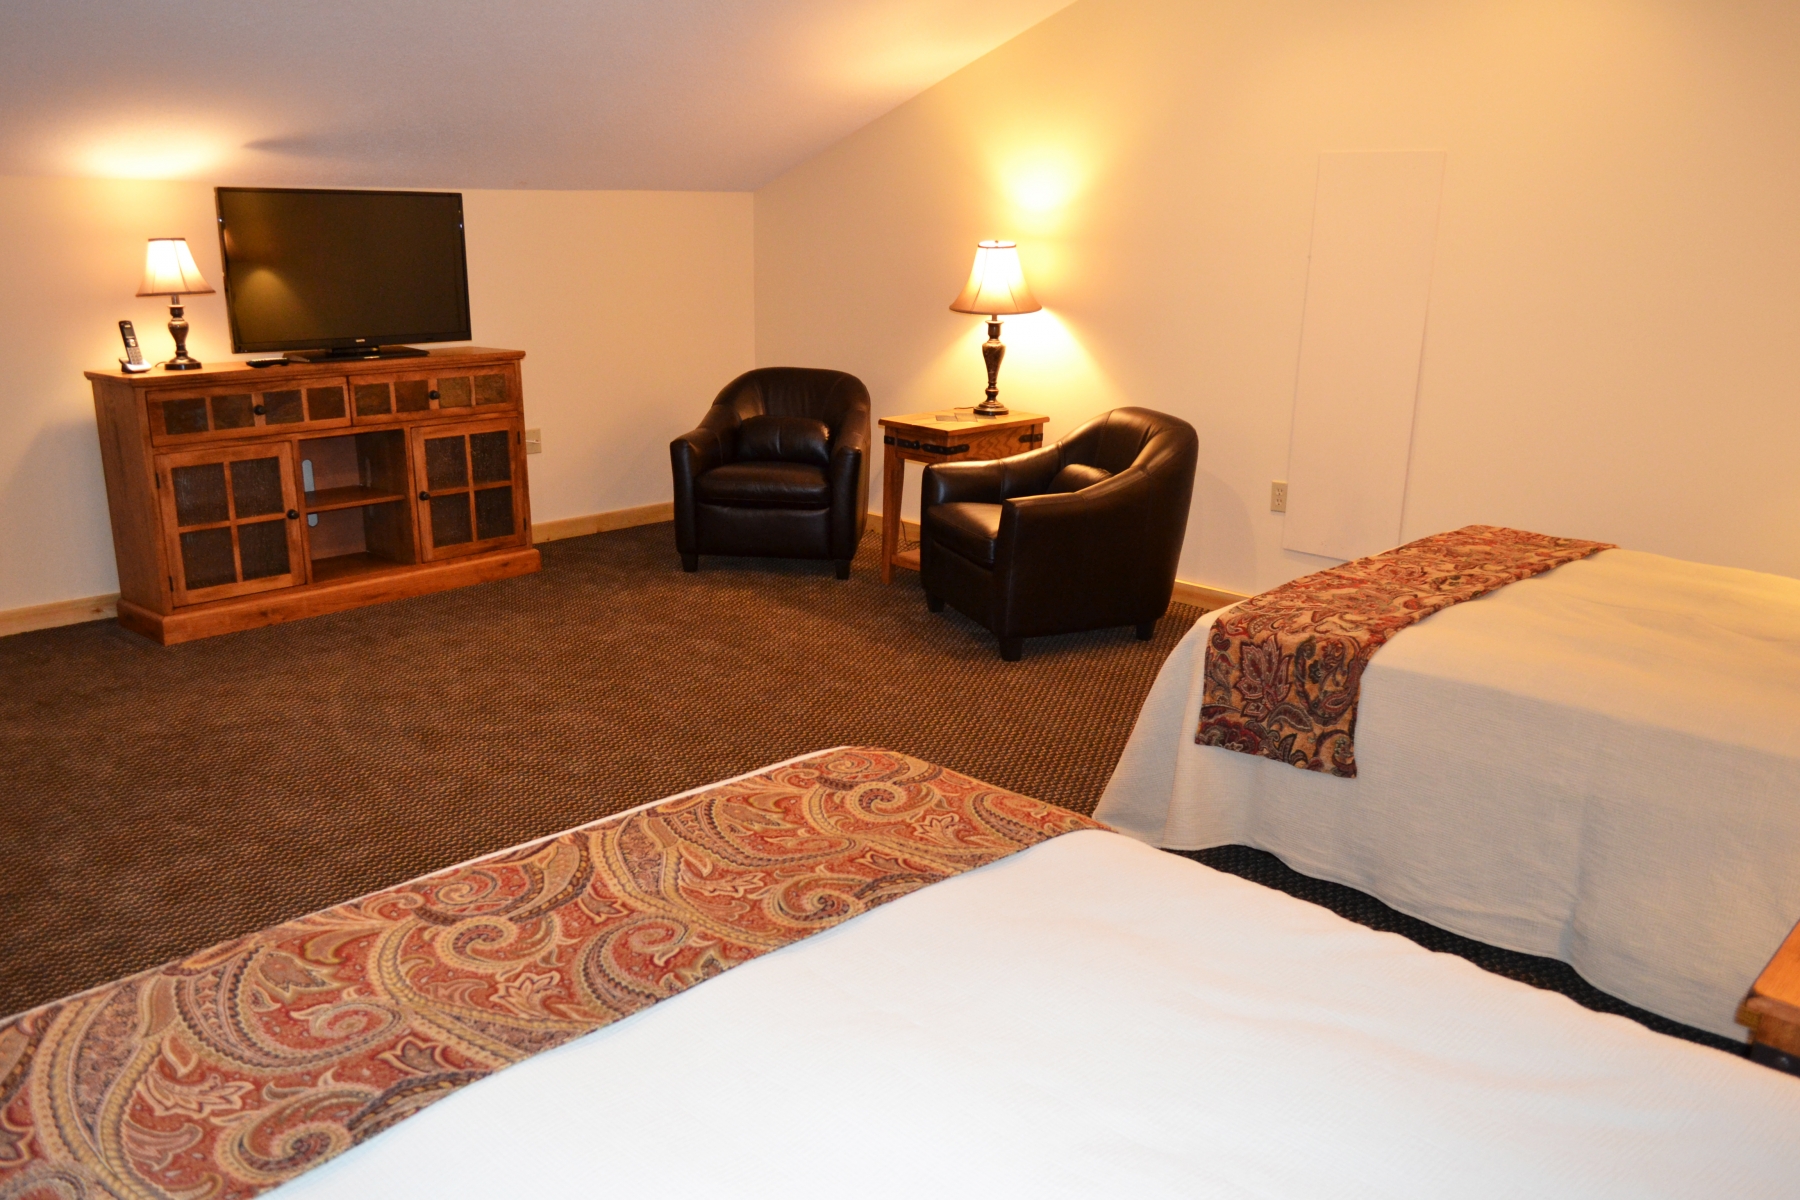 hotel bedroom with two beds a seating area and tv stand